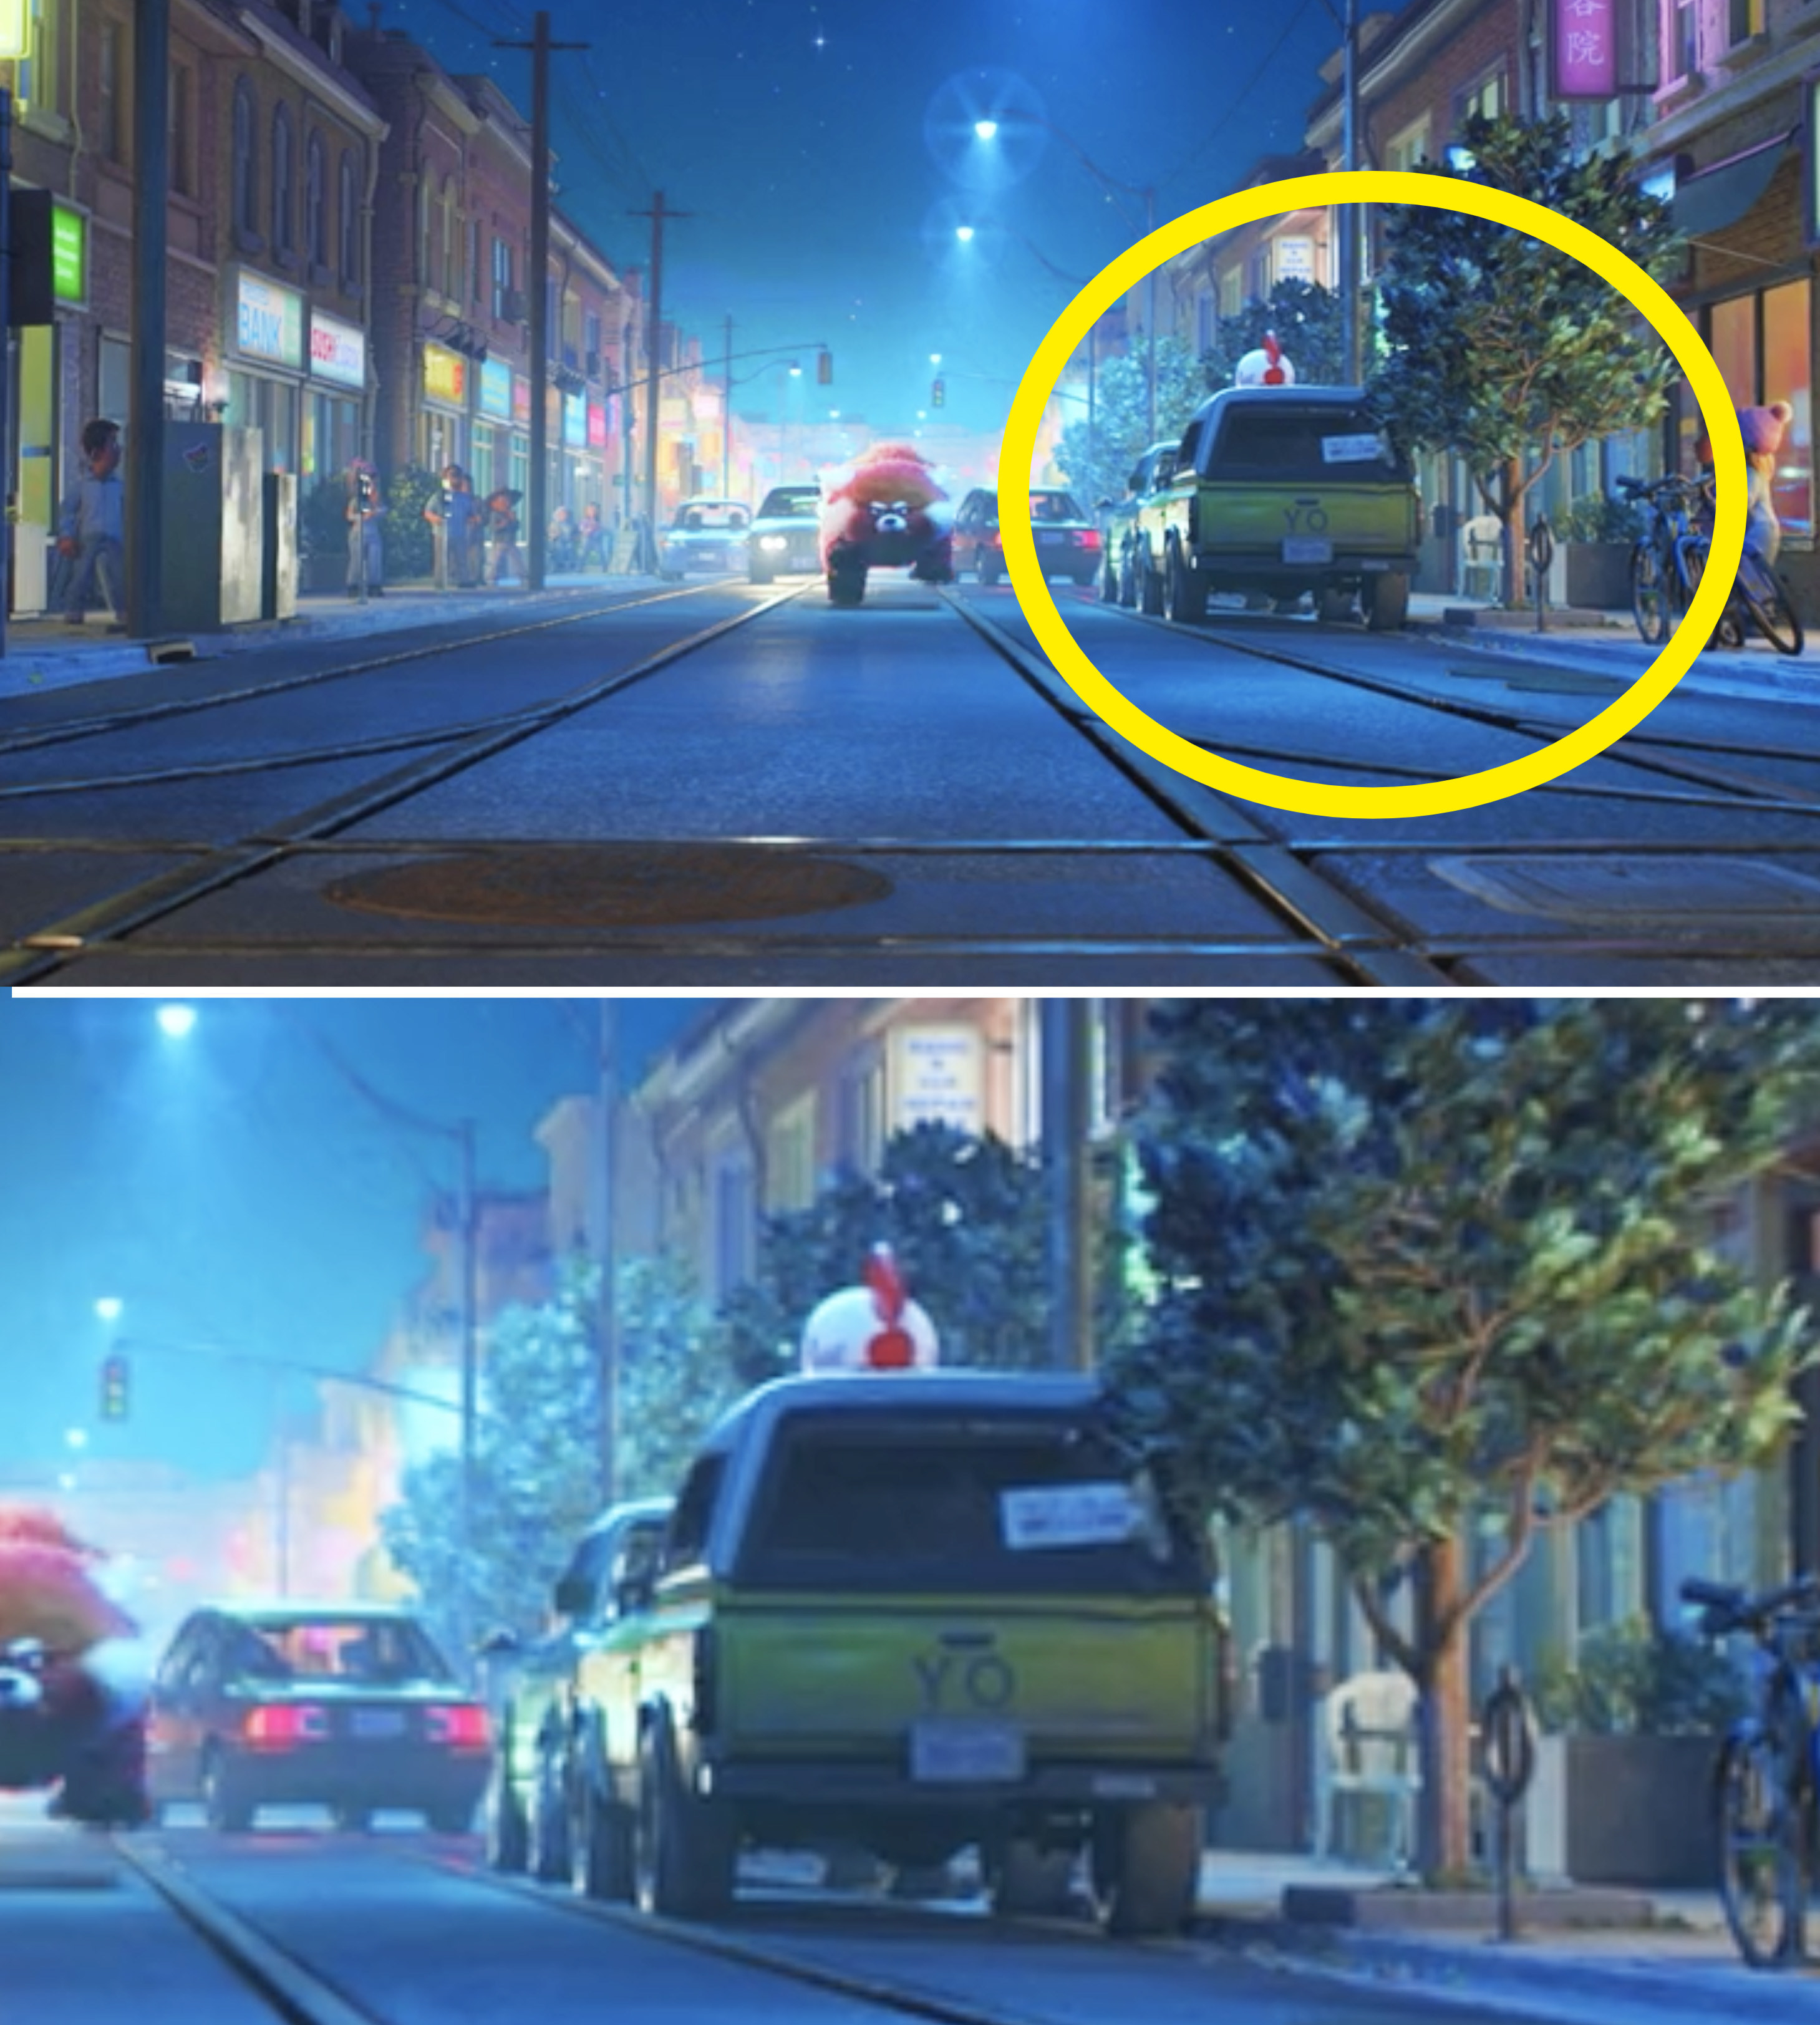 A Pizza Planet truck parked on the side of a road when Mei runs by